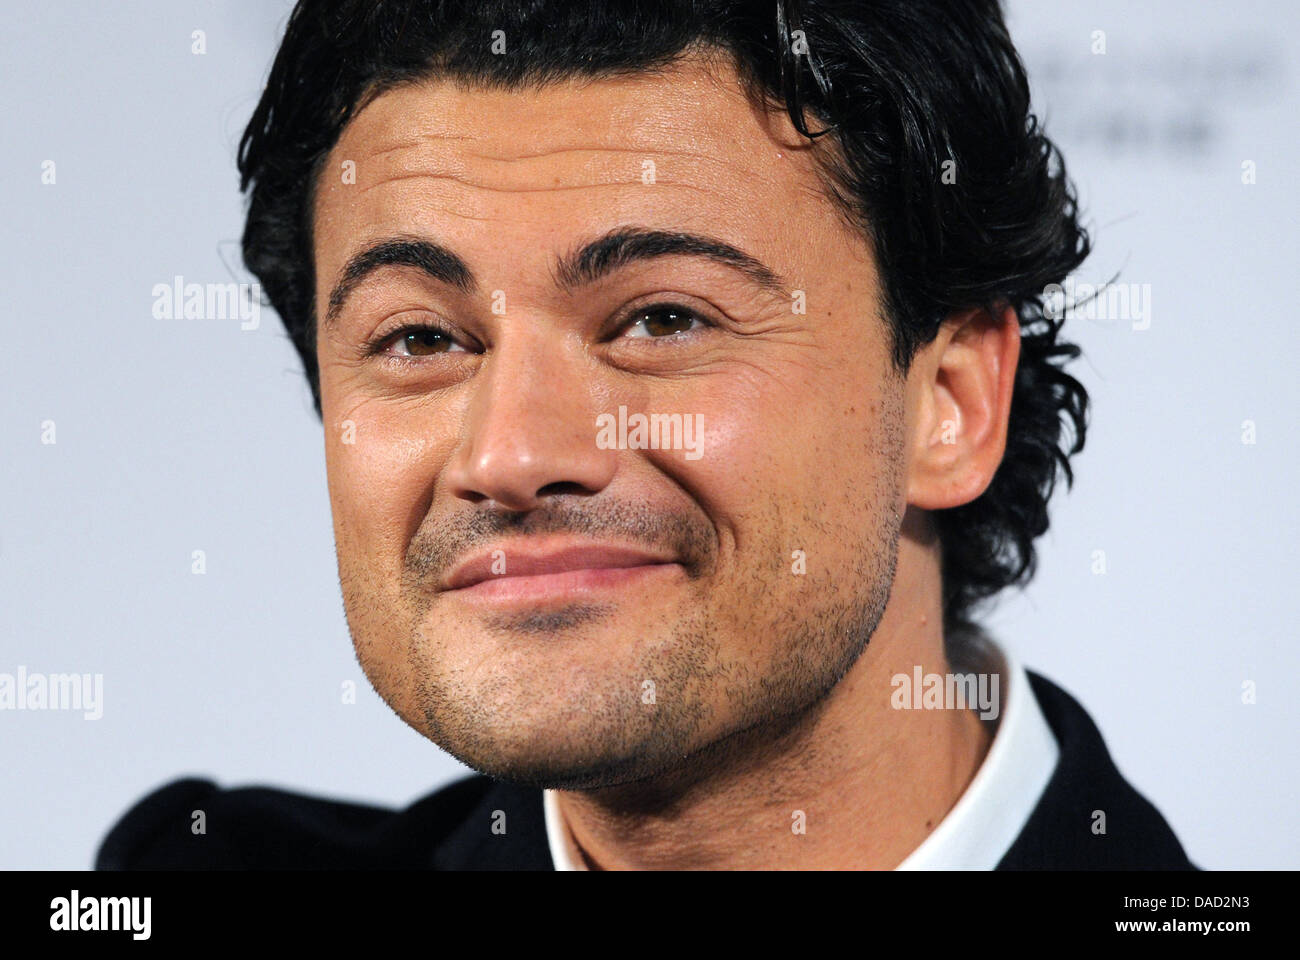 Italian tenor Vittorio Grigolo smiles at the 'Echo Klassik 2011' award ceremony at the Konzerthaus in Berlin, Germany, 02 October 2011. Grigolo won the prize for best newcomer and dedicated his ward to Zubin Metha. Since 1994, the Phono Academy selects outstanding works in classical music, and since 1996, the ceremony airs on TV. Photo: Rainer Jensen Stock Photo